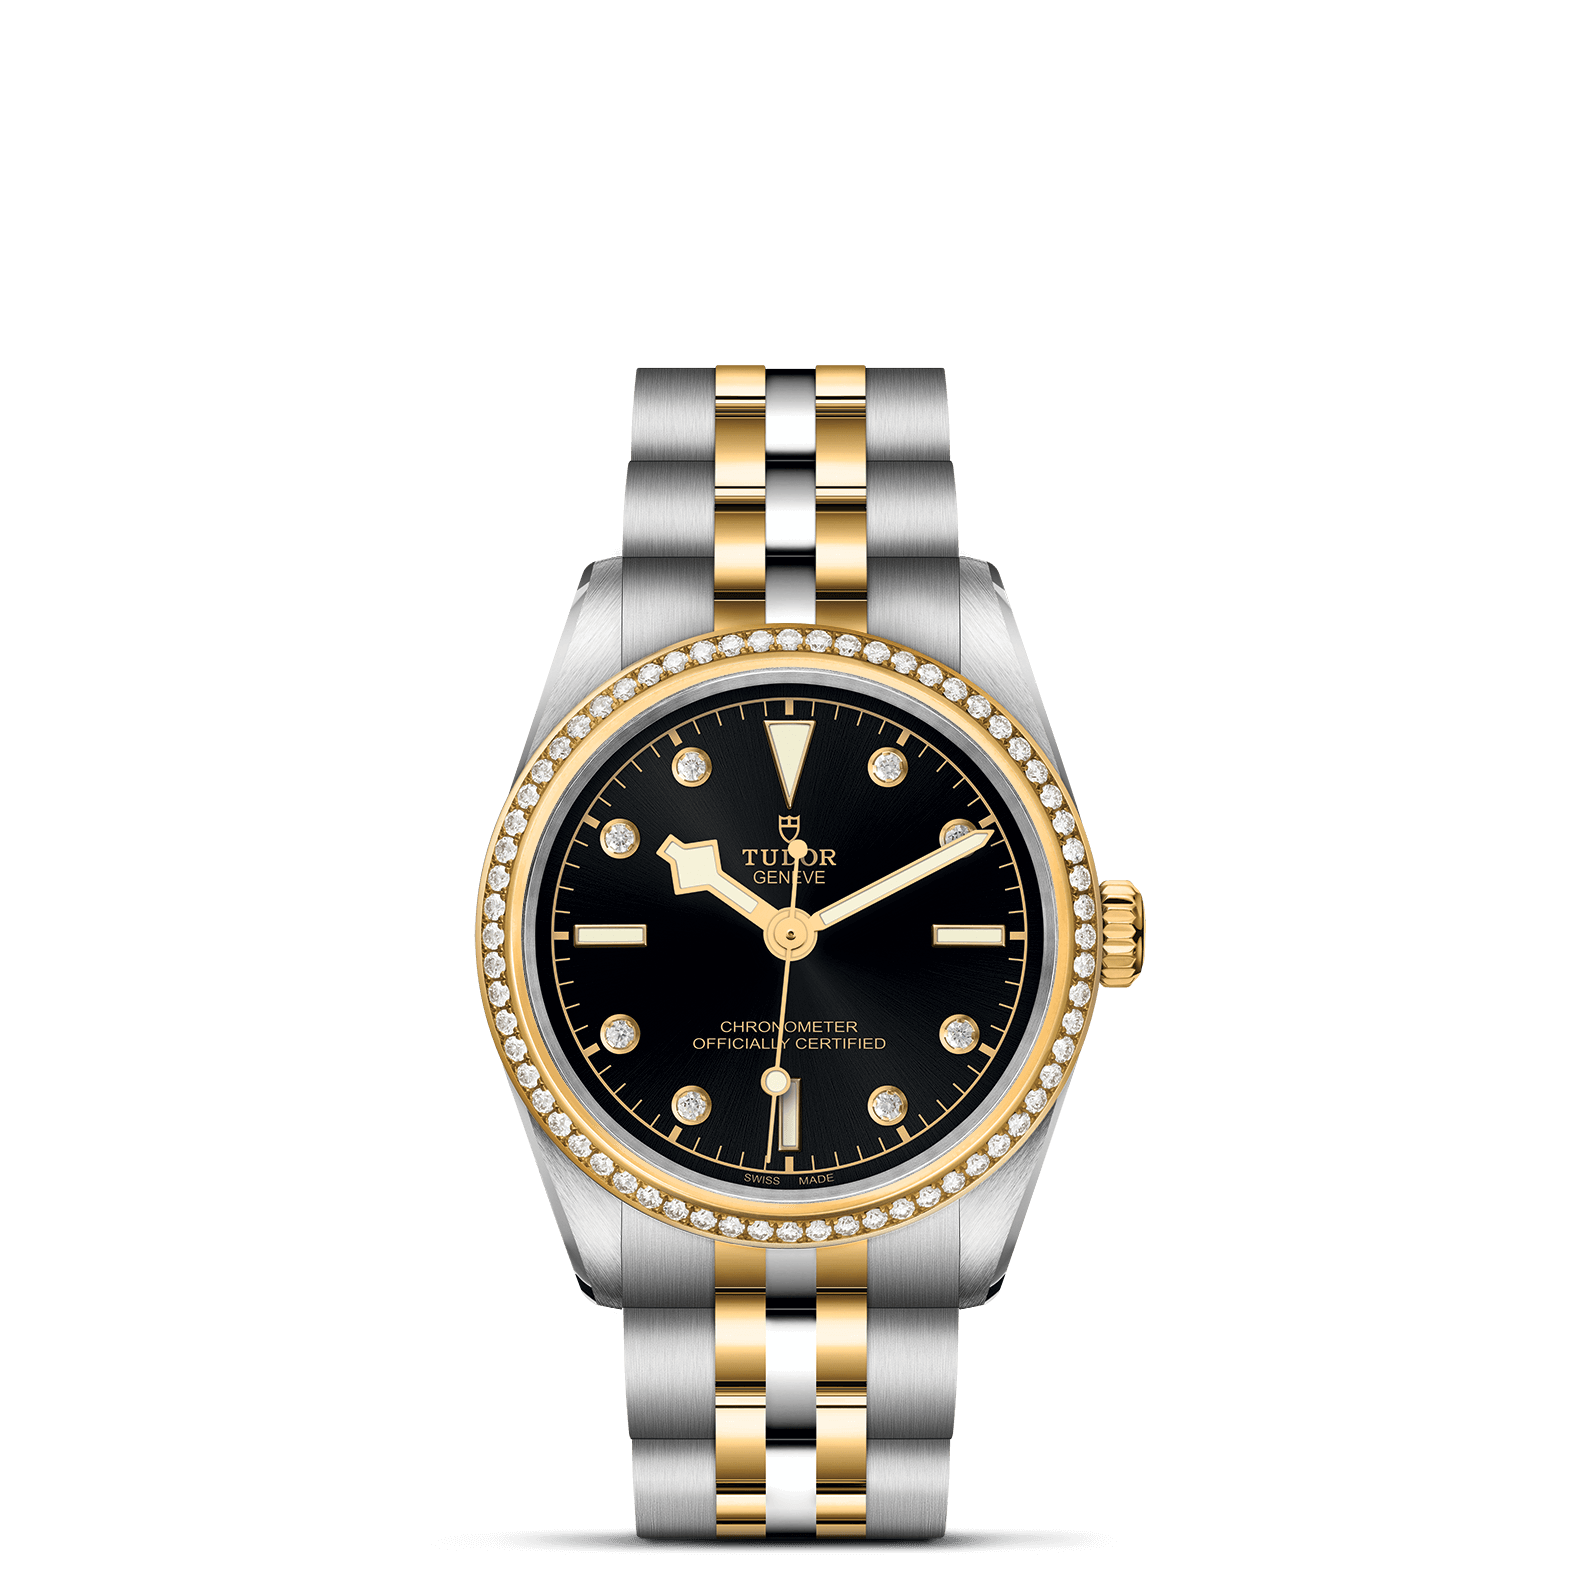 A luxury wristwatch with a black dial, gold markers, and a two-tone gold and silver bracelet, against a black background.